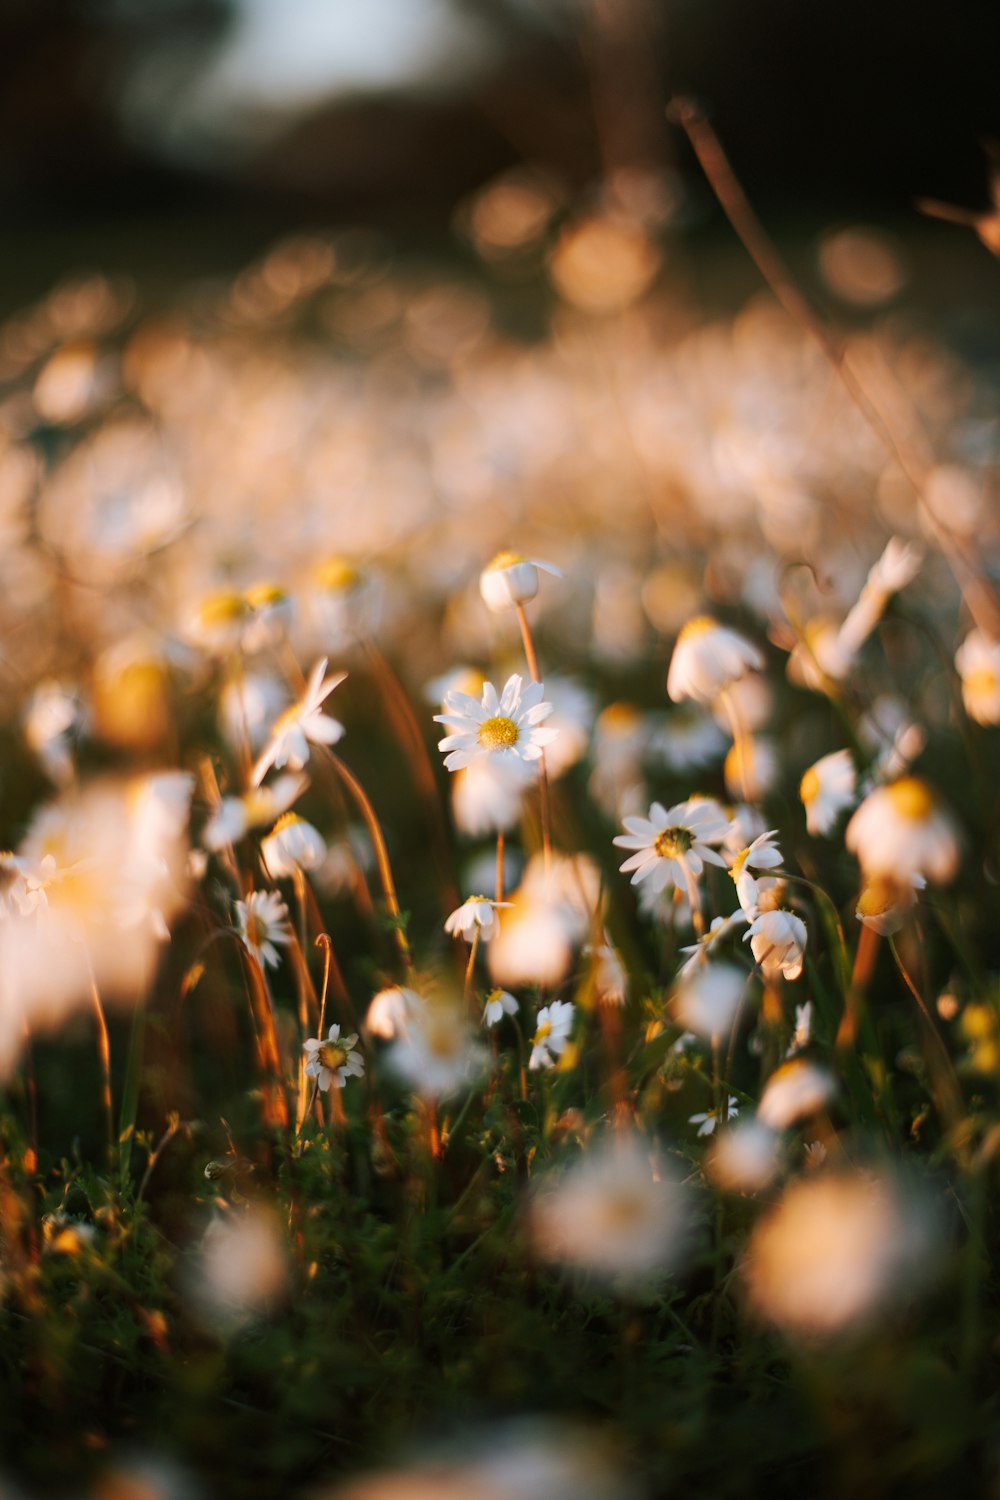 a field full of white daisies in the sunlight